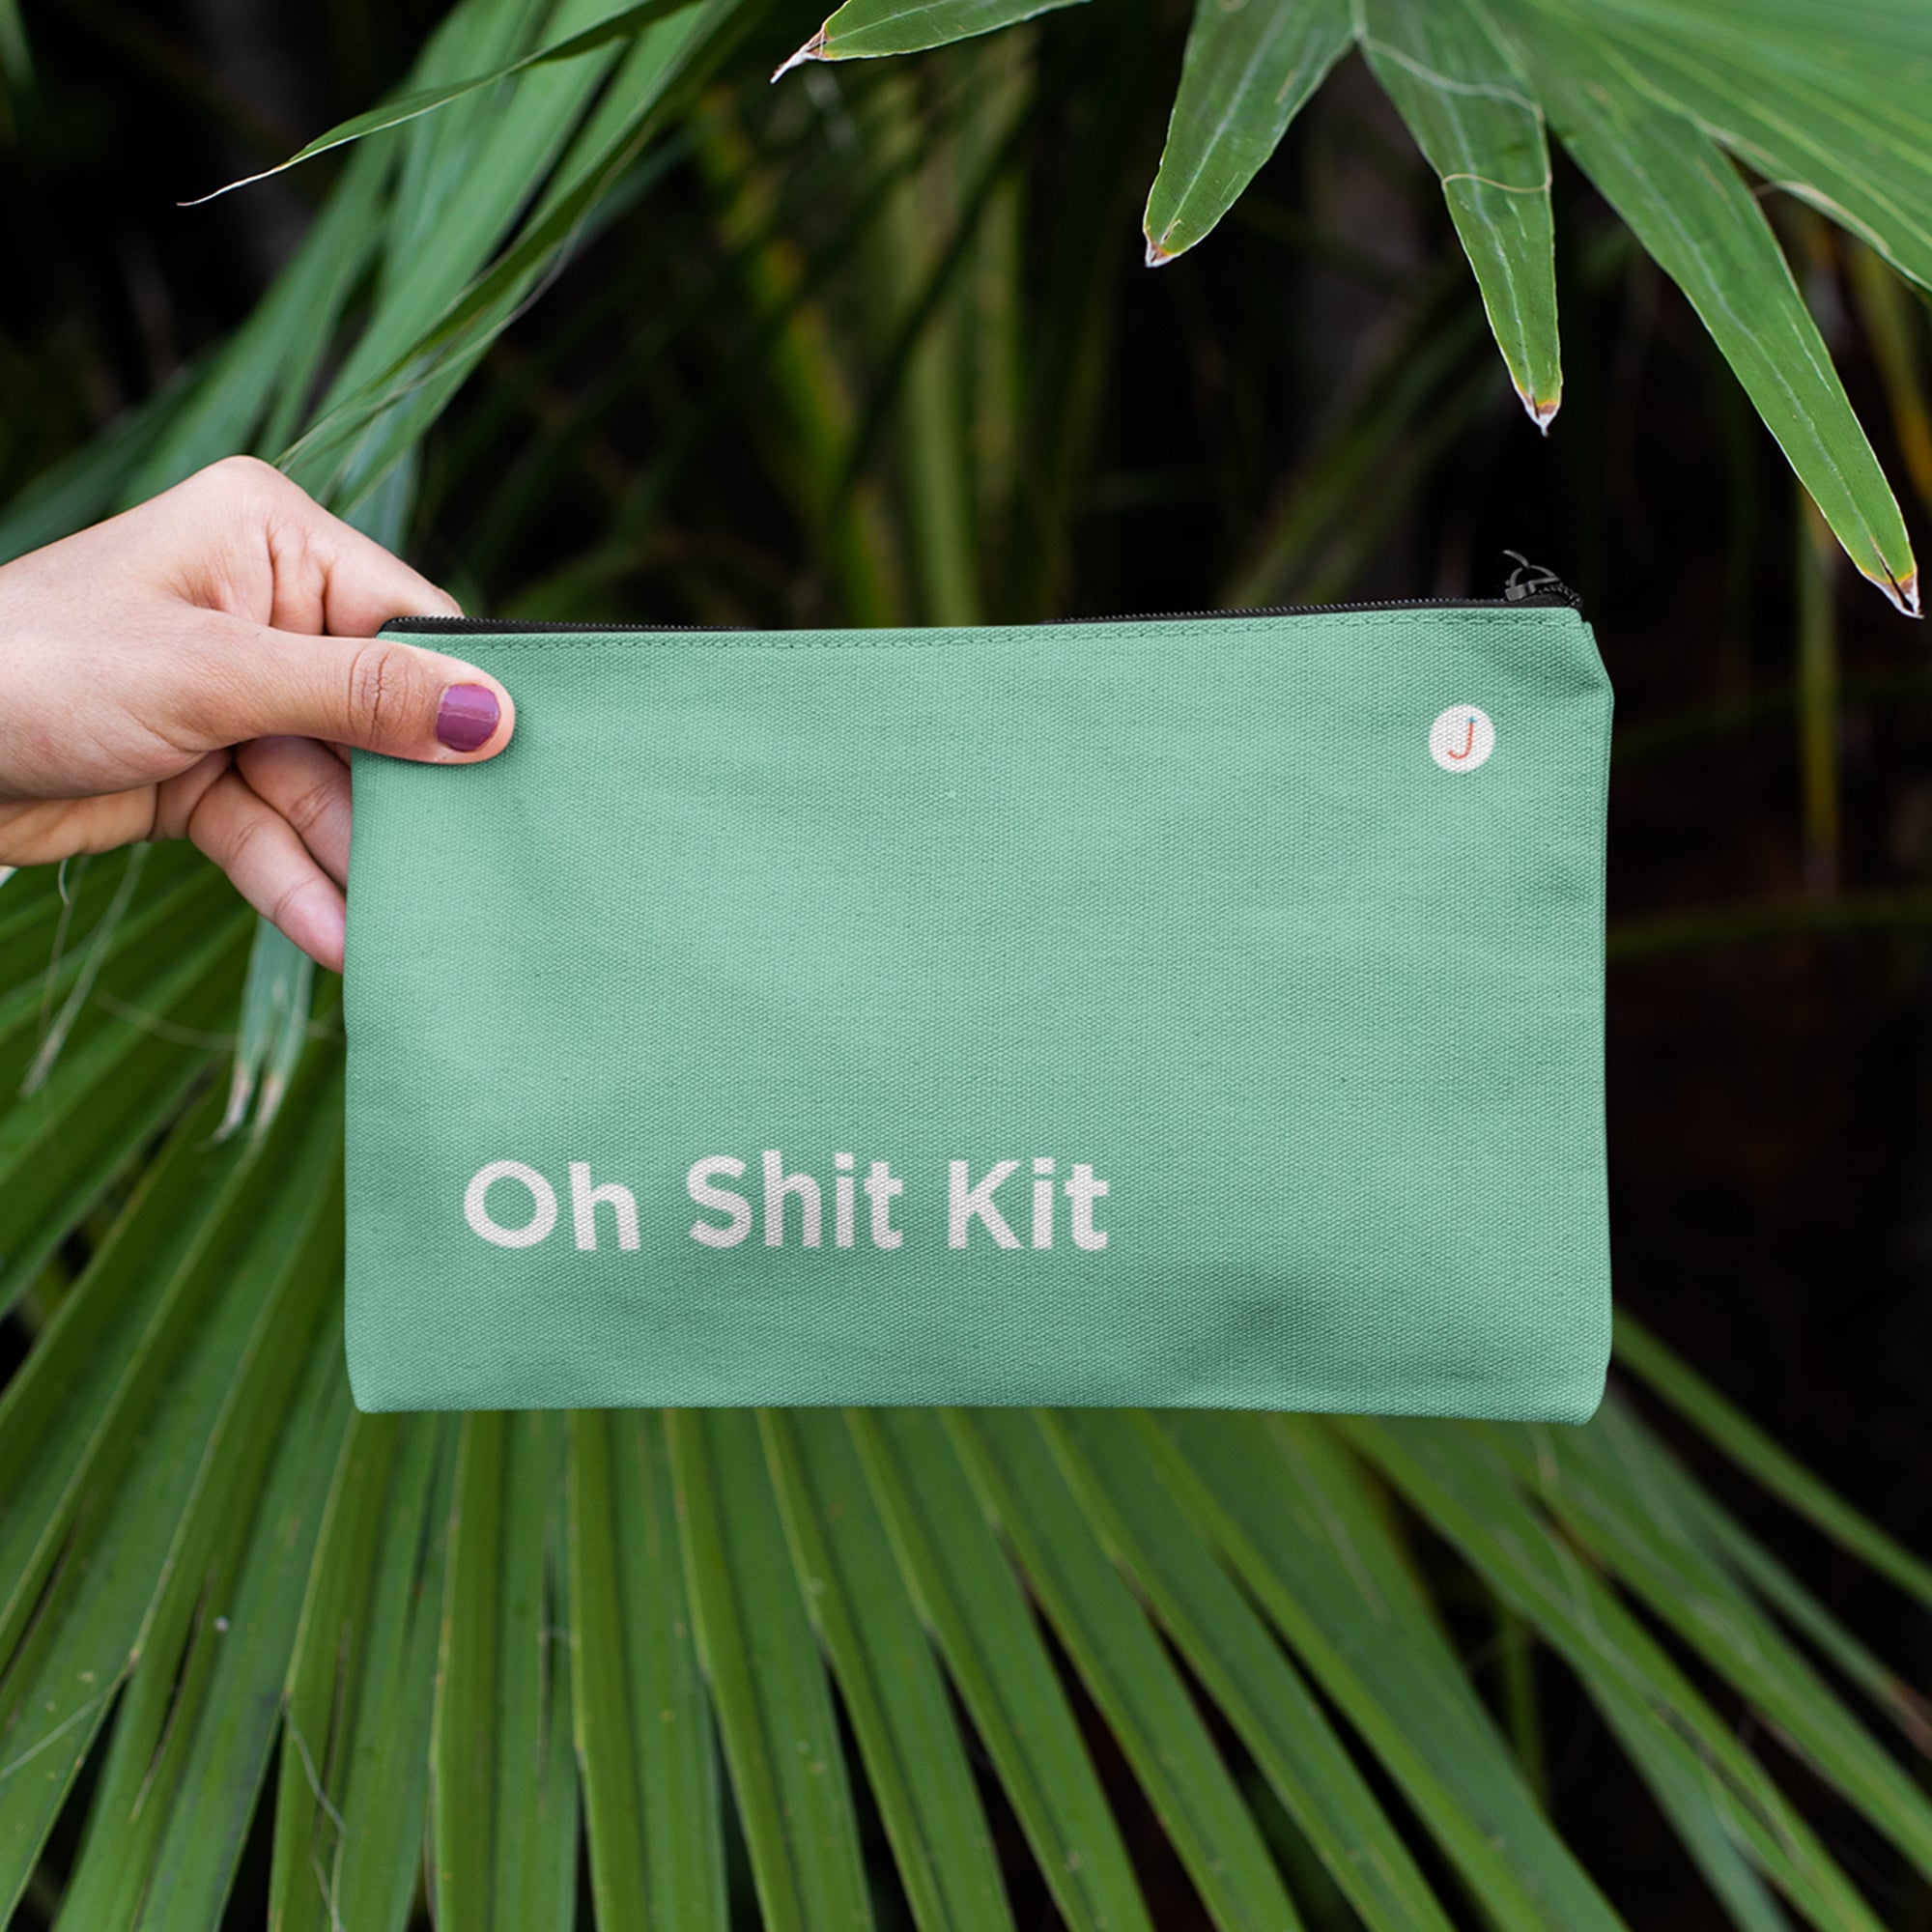 Oh Shit Kit Travel Accessory Pouch – Journo Travel Goods